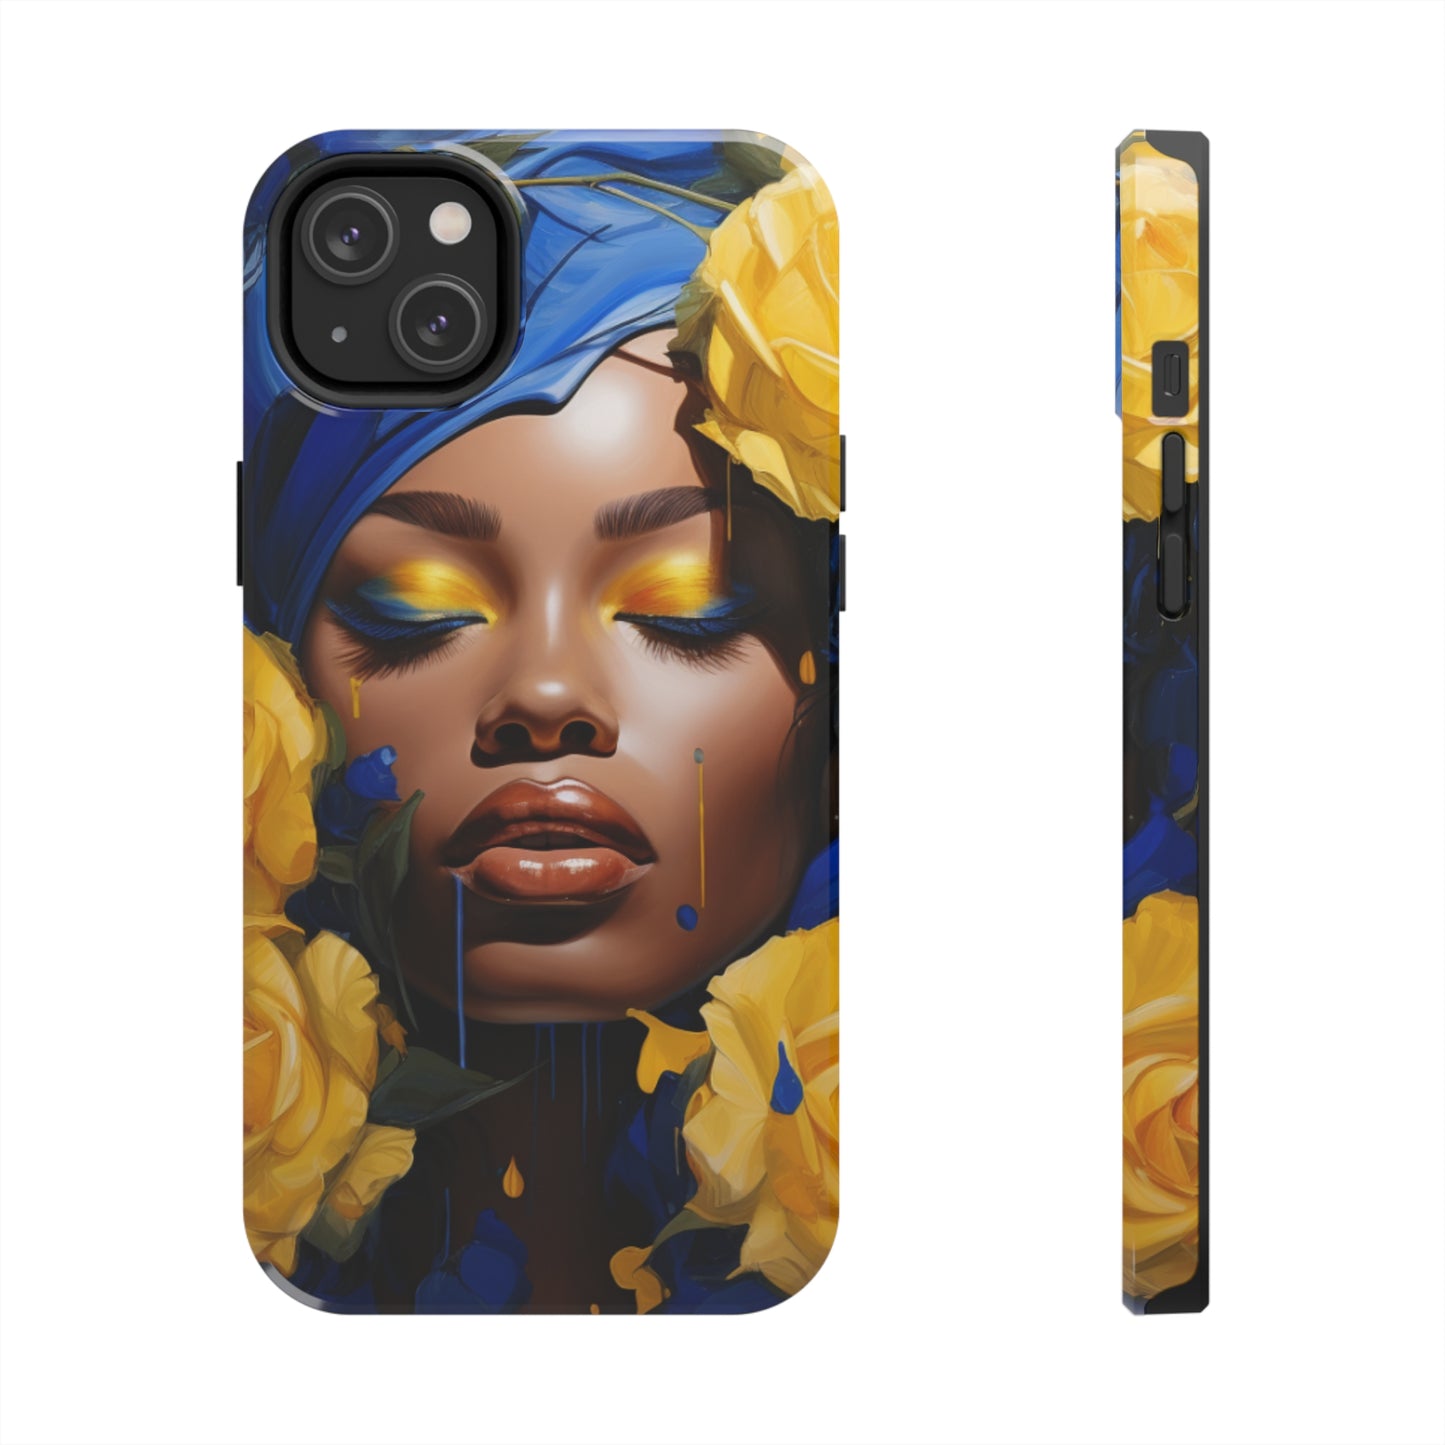 Stunning in Blue and Gold Beautiful Black Woman Tough Case For iPhone  - #2